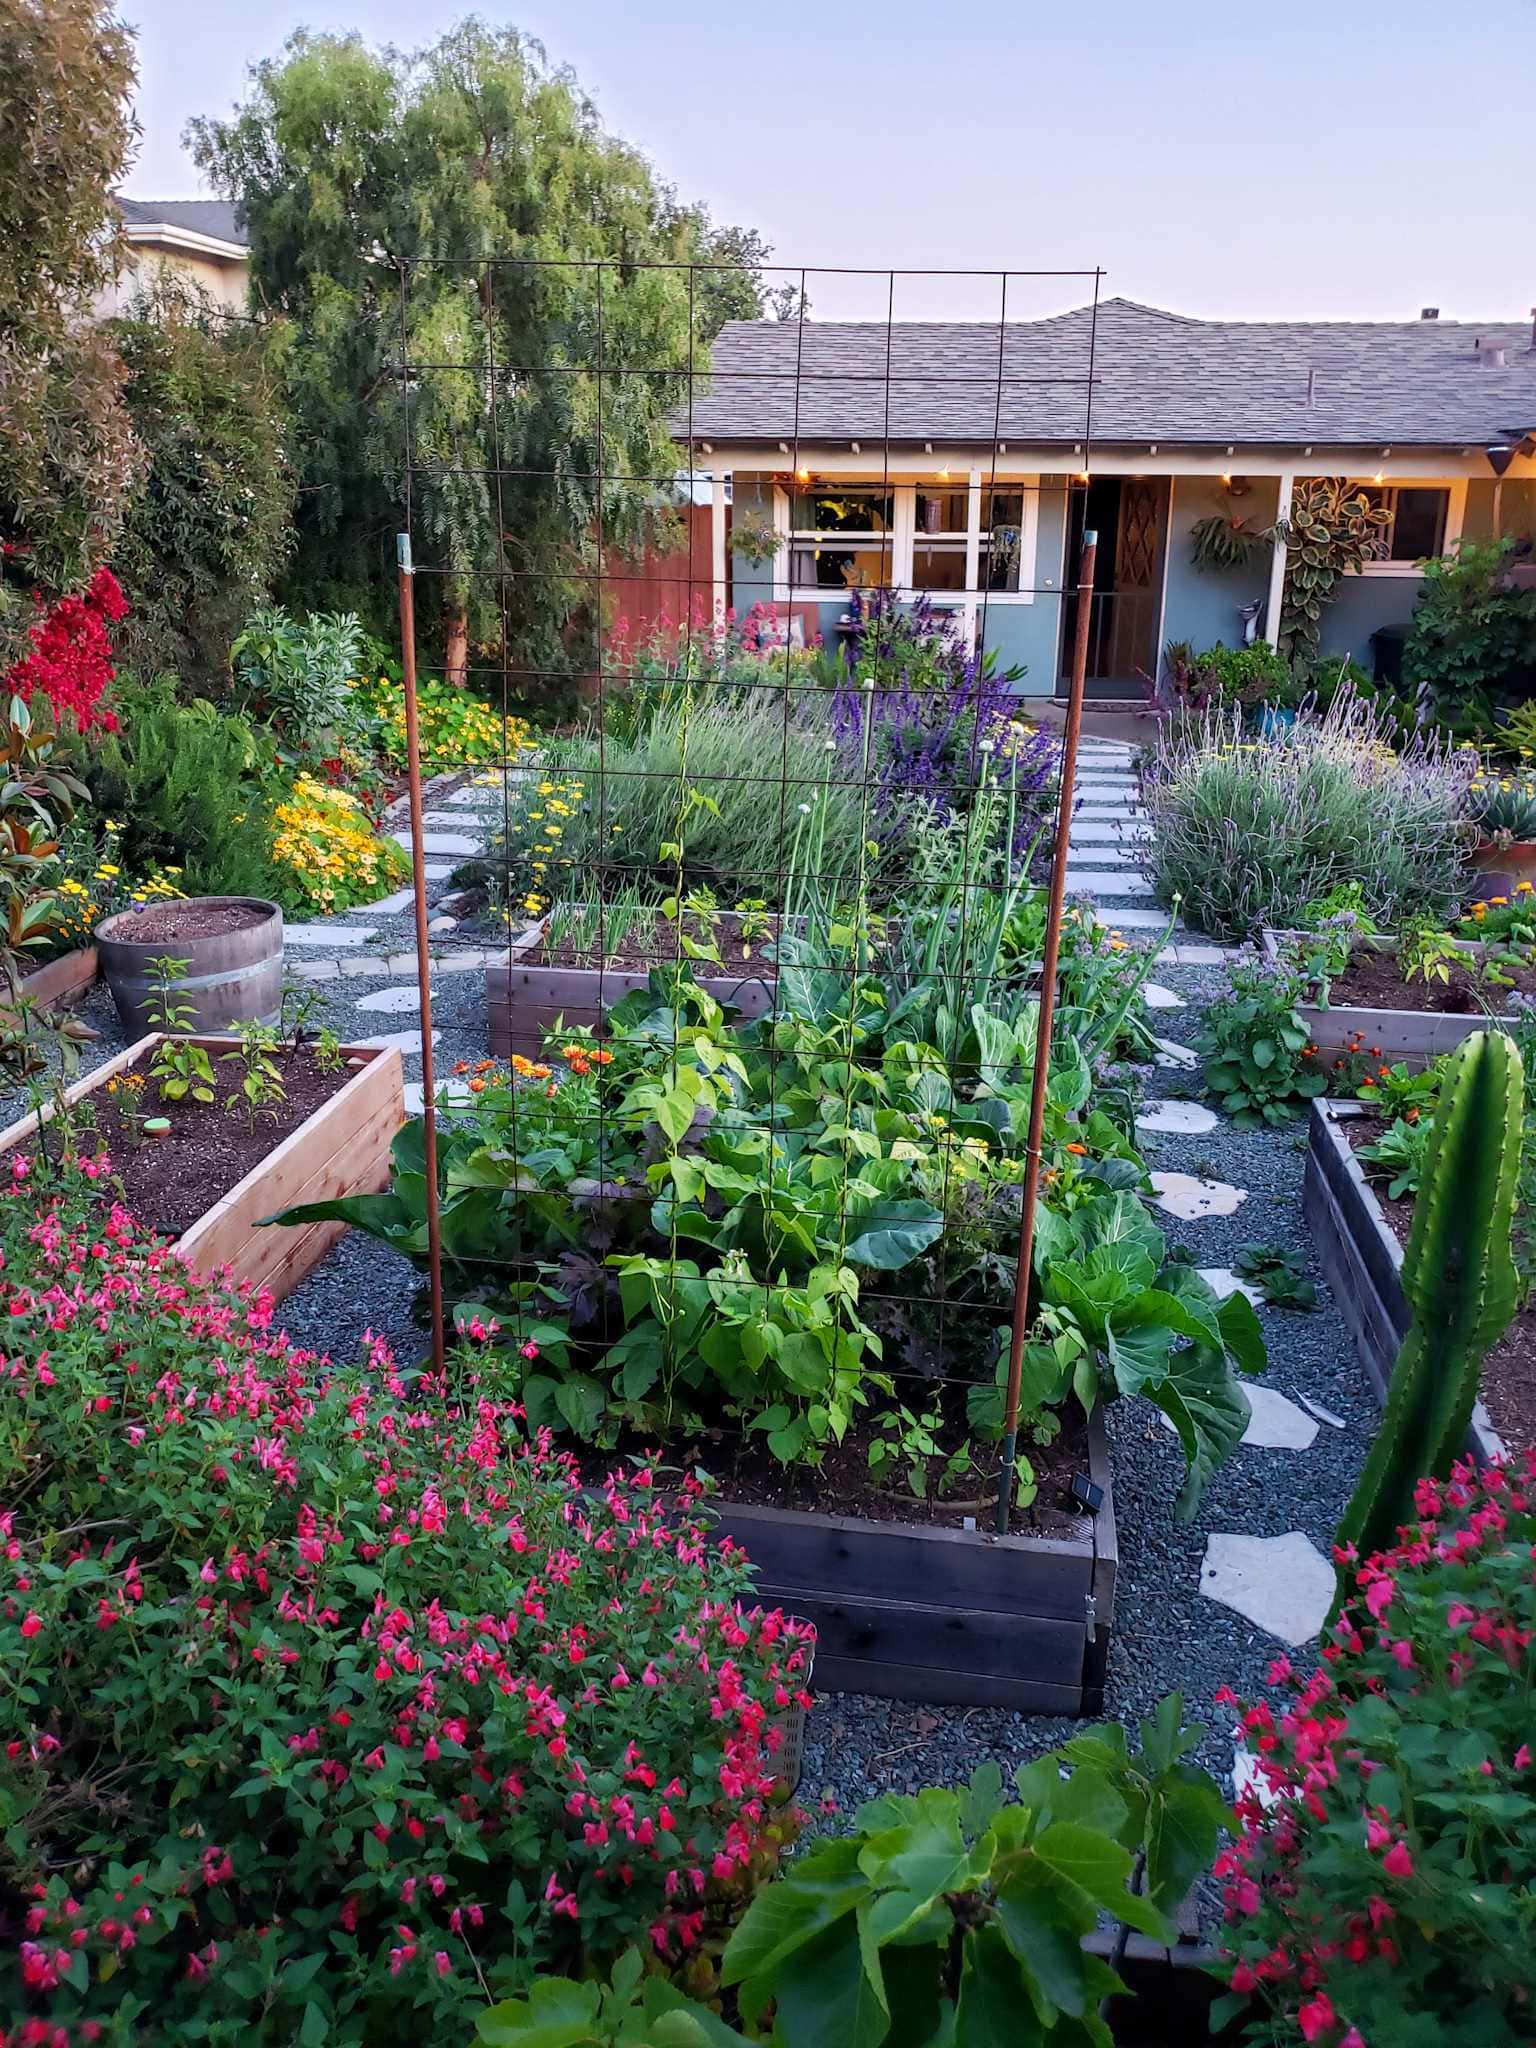 A front yard garden in full bloom, various raised beds contain vegetables of various types while perennials, trees, and plants of other various types are littered throughout the yard in a type of organized chaos. The foreground of the photo has beautiful pink blossoms from a salvia plant which stand it in stark contrast to the blues and purples of most of the plants as well as the evening sky.